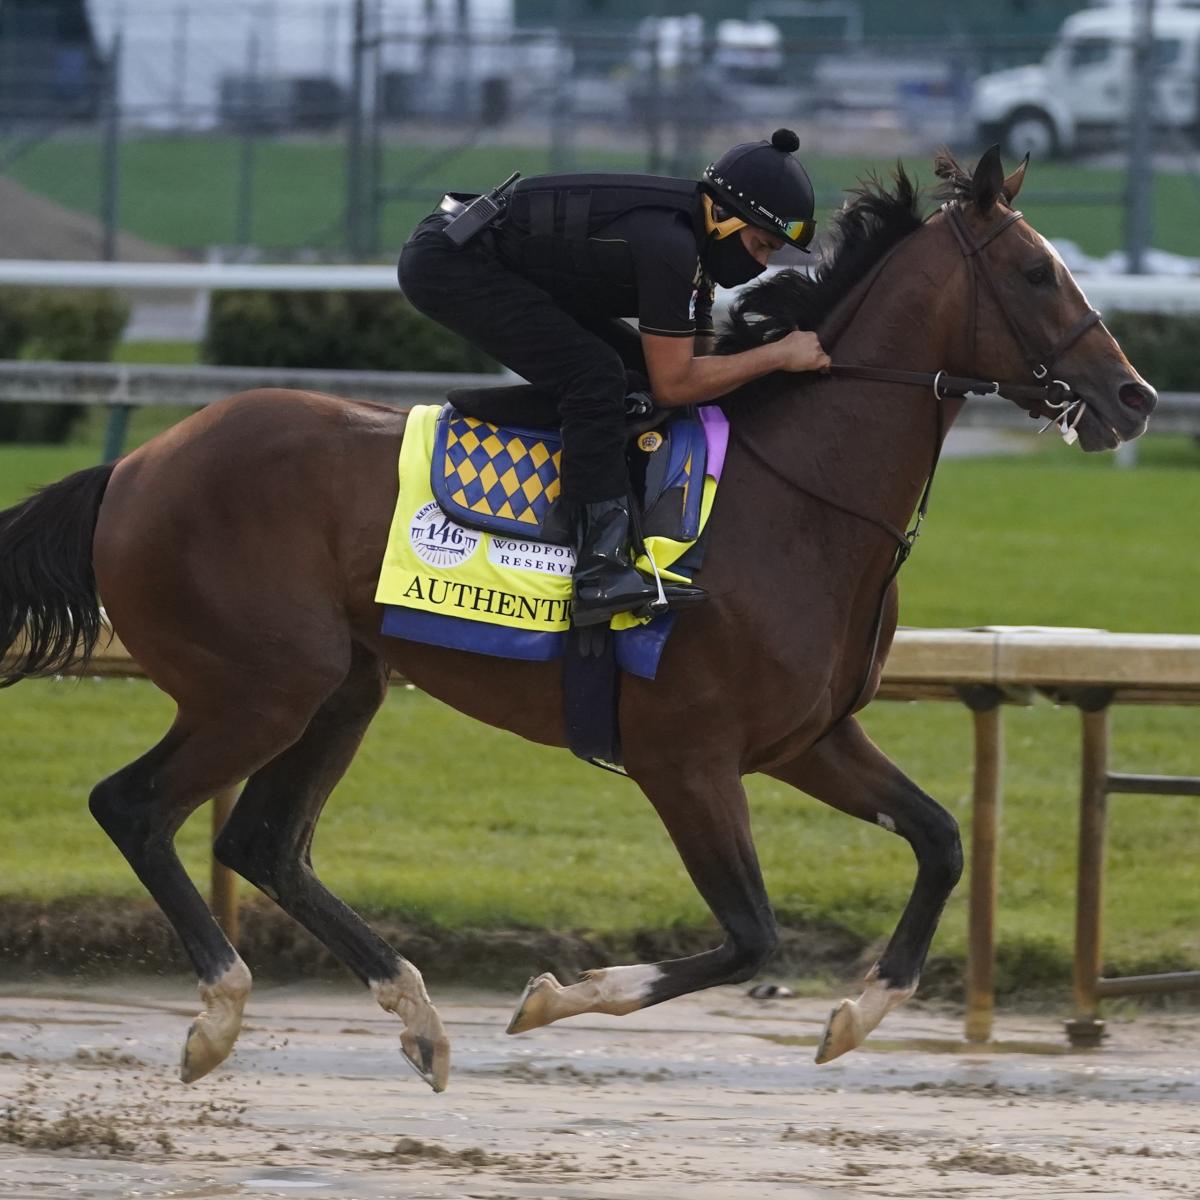 Preakness Odds 2020 Picks and Predictions Based on Recent Betting